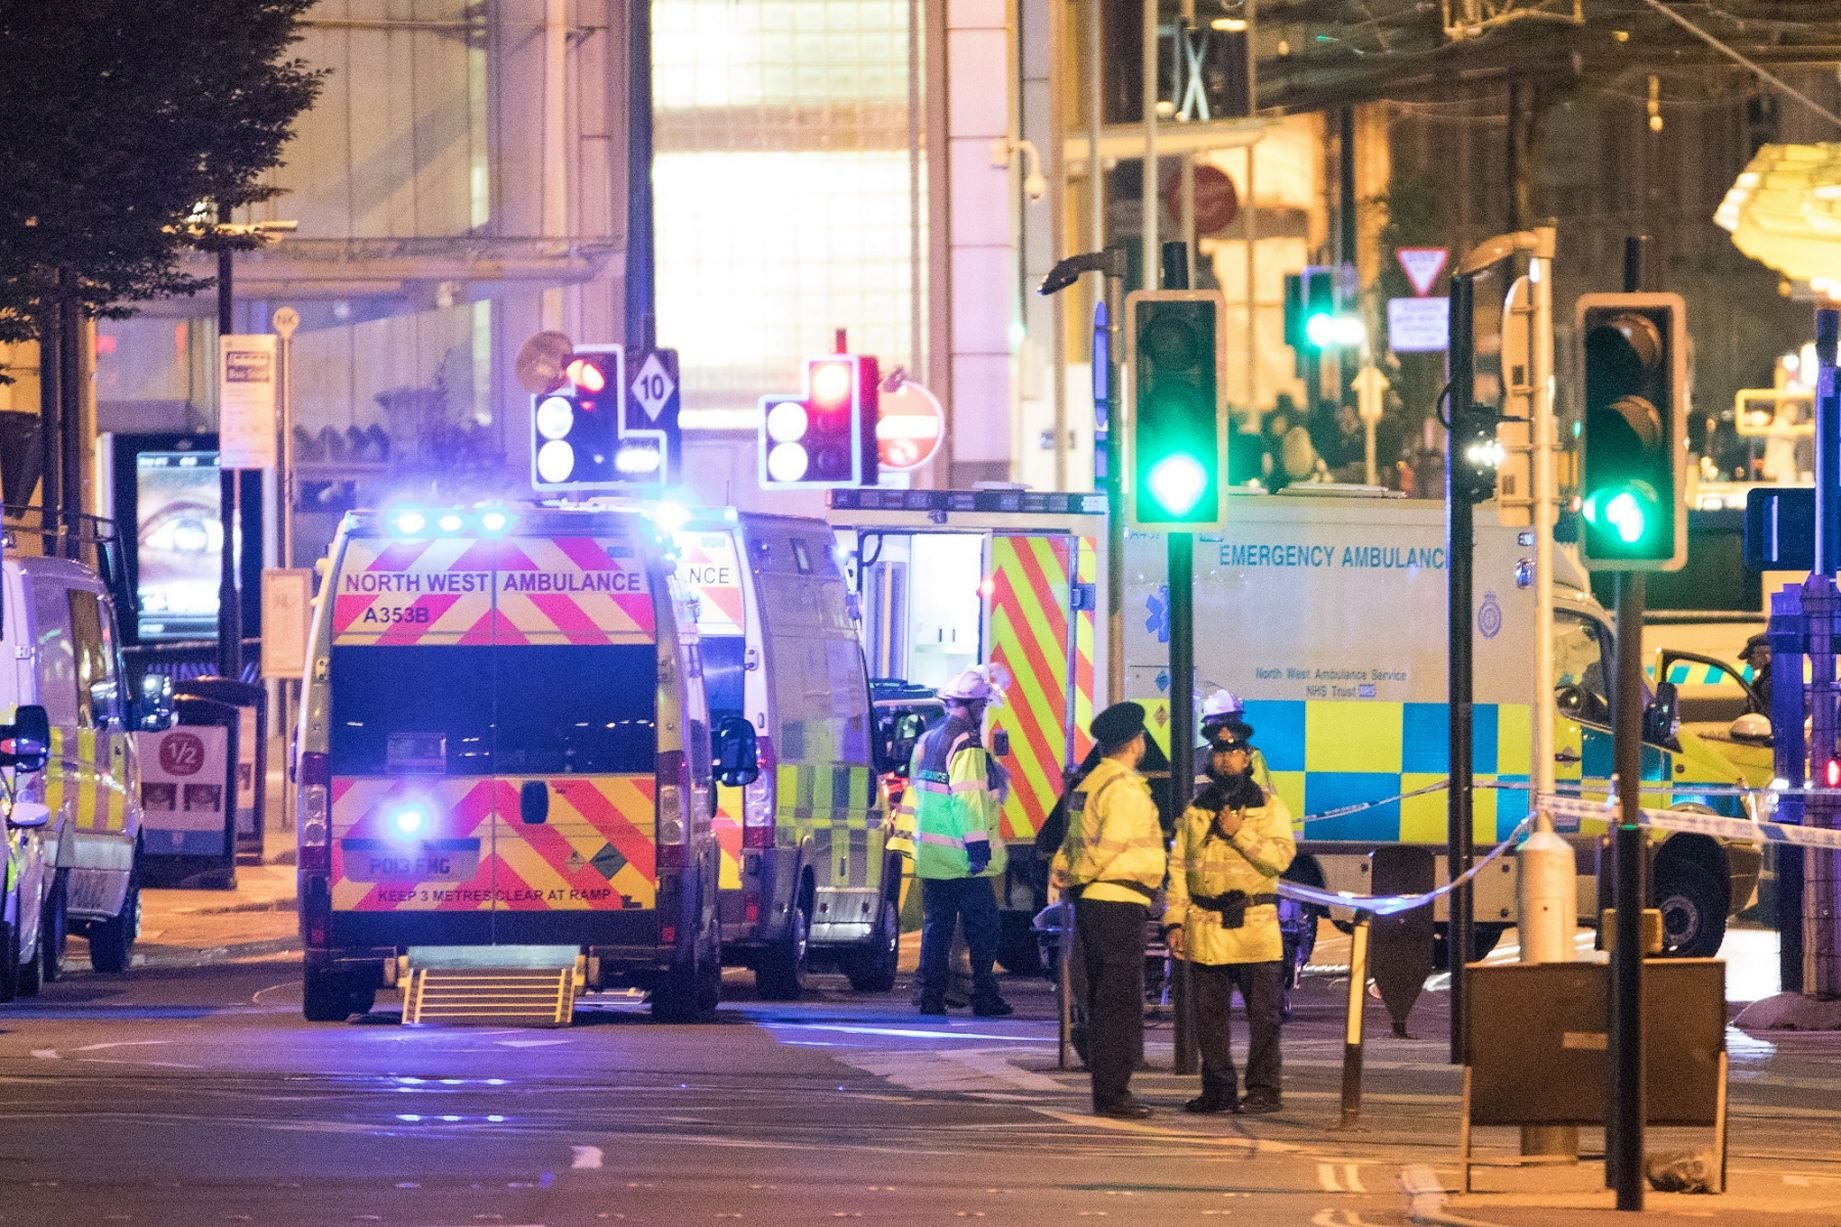 Manchester Arena attack